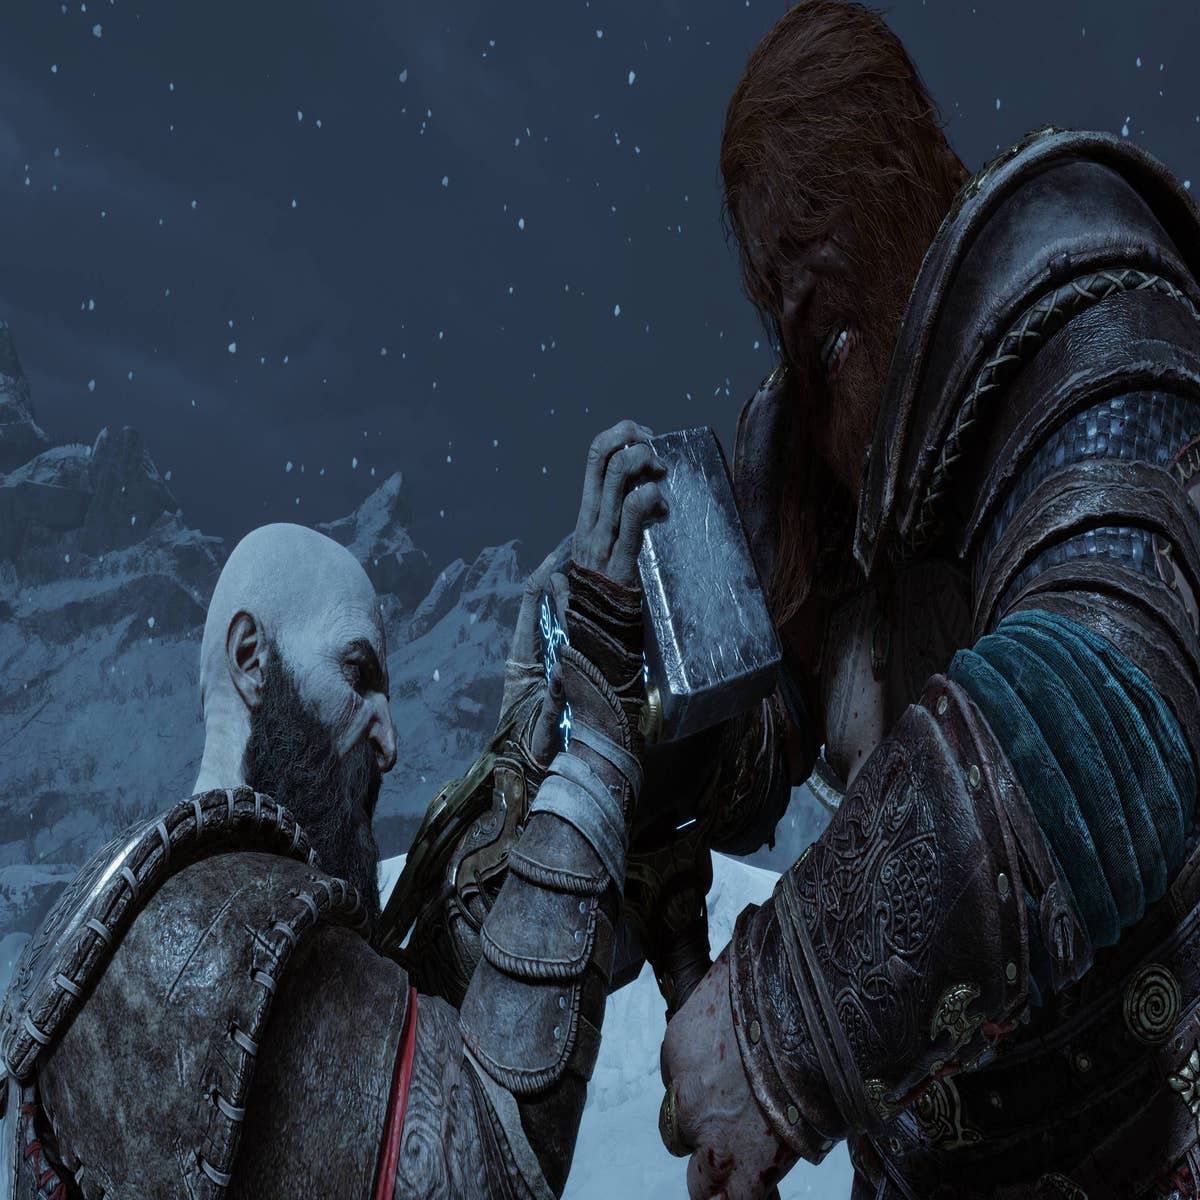 It's Been Fun Playing This Game On PC Hopefully God Of War